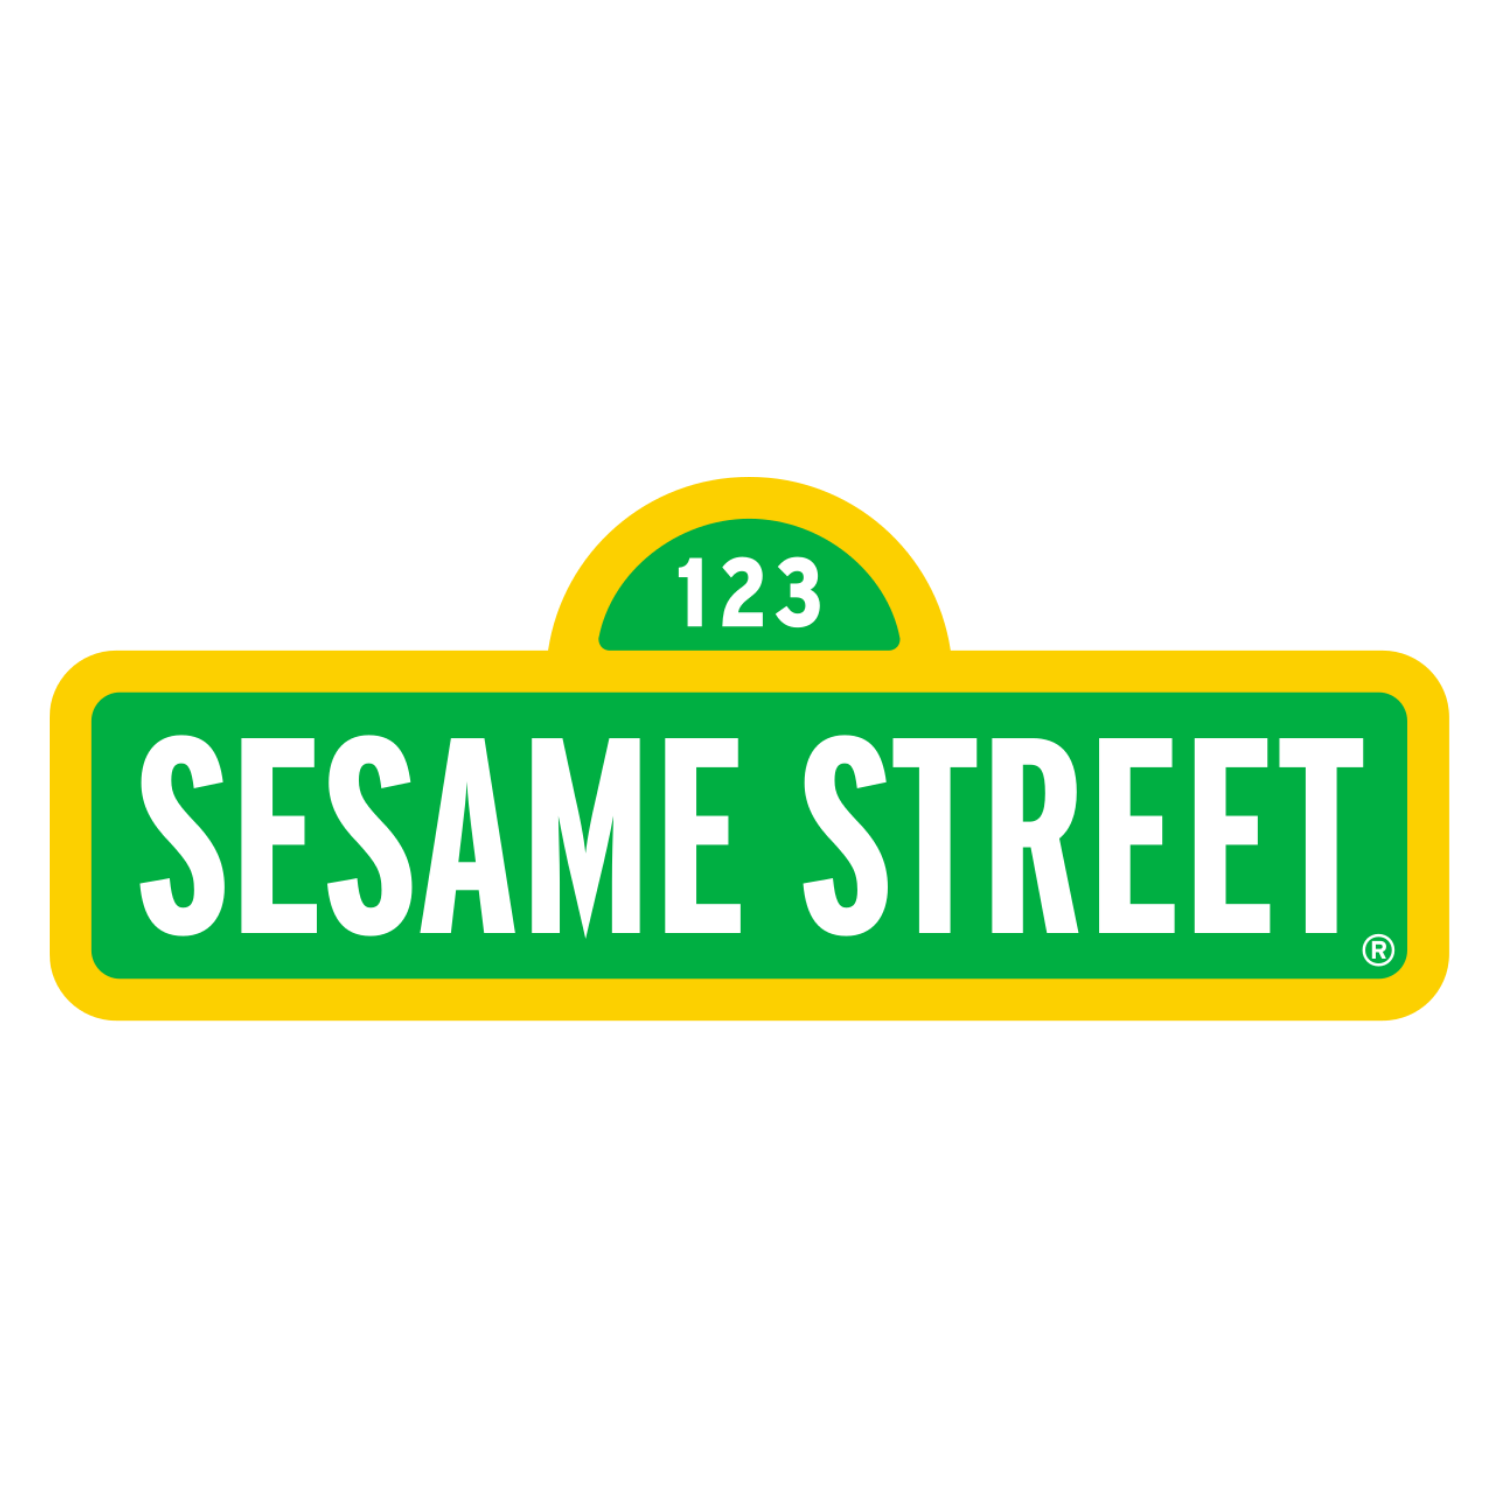 Shop Sesame Street products